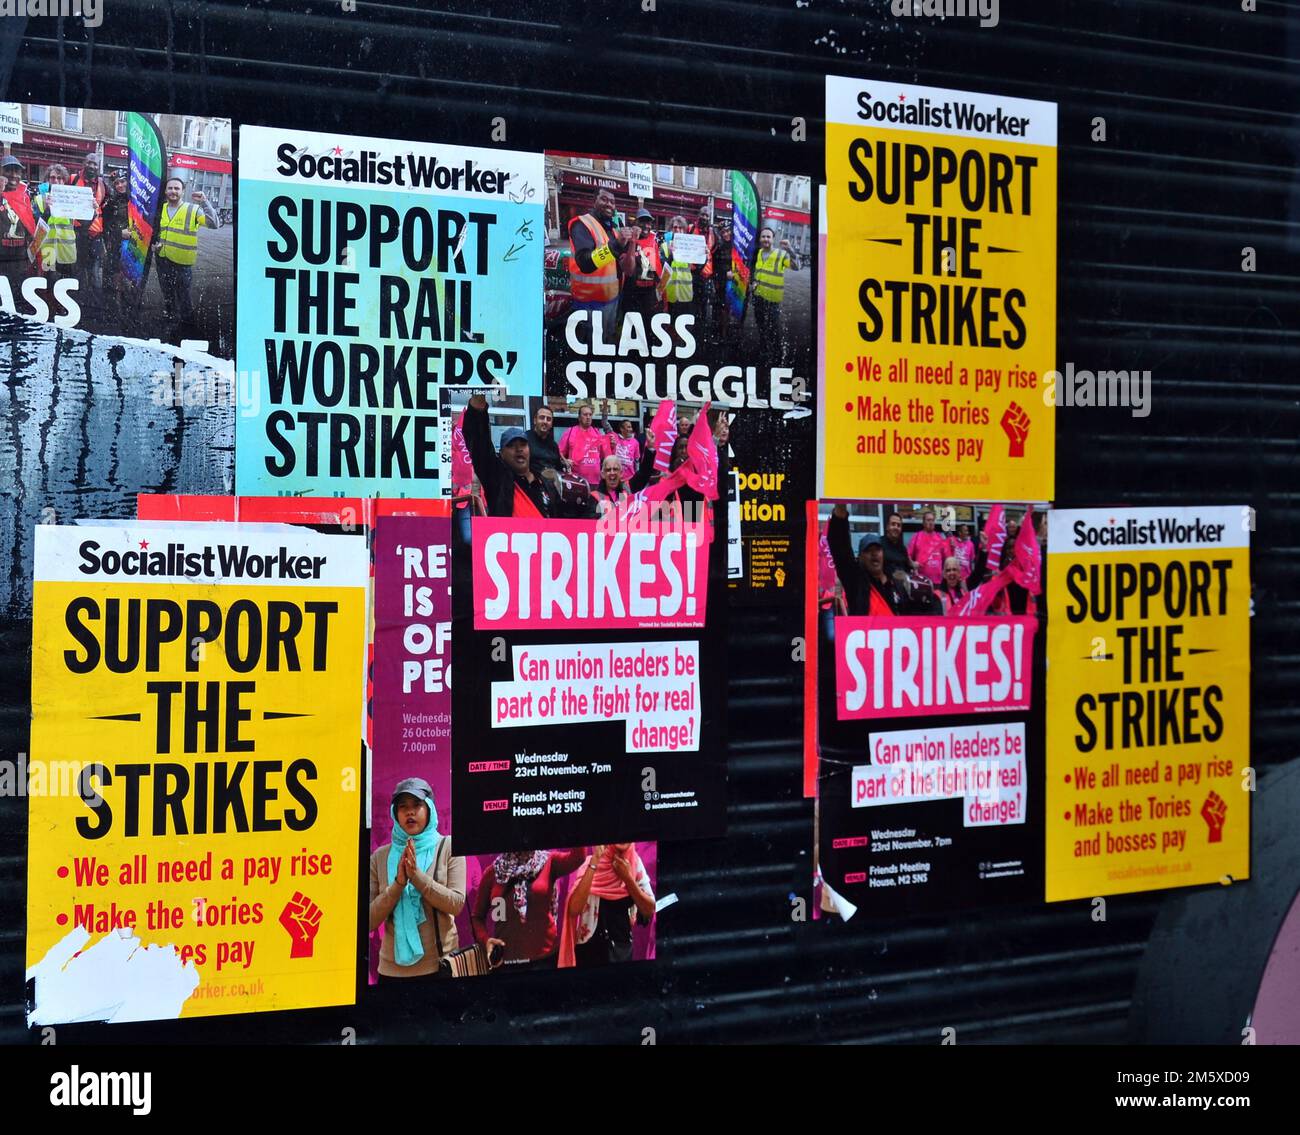 Posters, mainly produced by Socialist Worker, on an empty shop's window in Manchester, UK, urge passers-by to support the strikes. In 2022 there was industrial unrest in the UK as employees in the transport network, NHS, schools, and Royal Mail, took strike action. In 2023 it is expected that there will be stoppages by rail workers, bus drivers, nurses, ambulance workers and  teachers in Scotland. Stock Photo